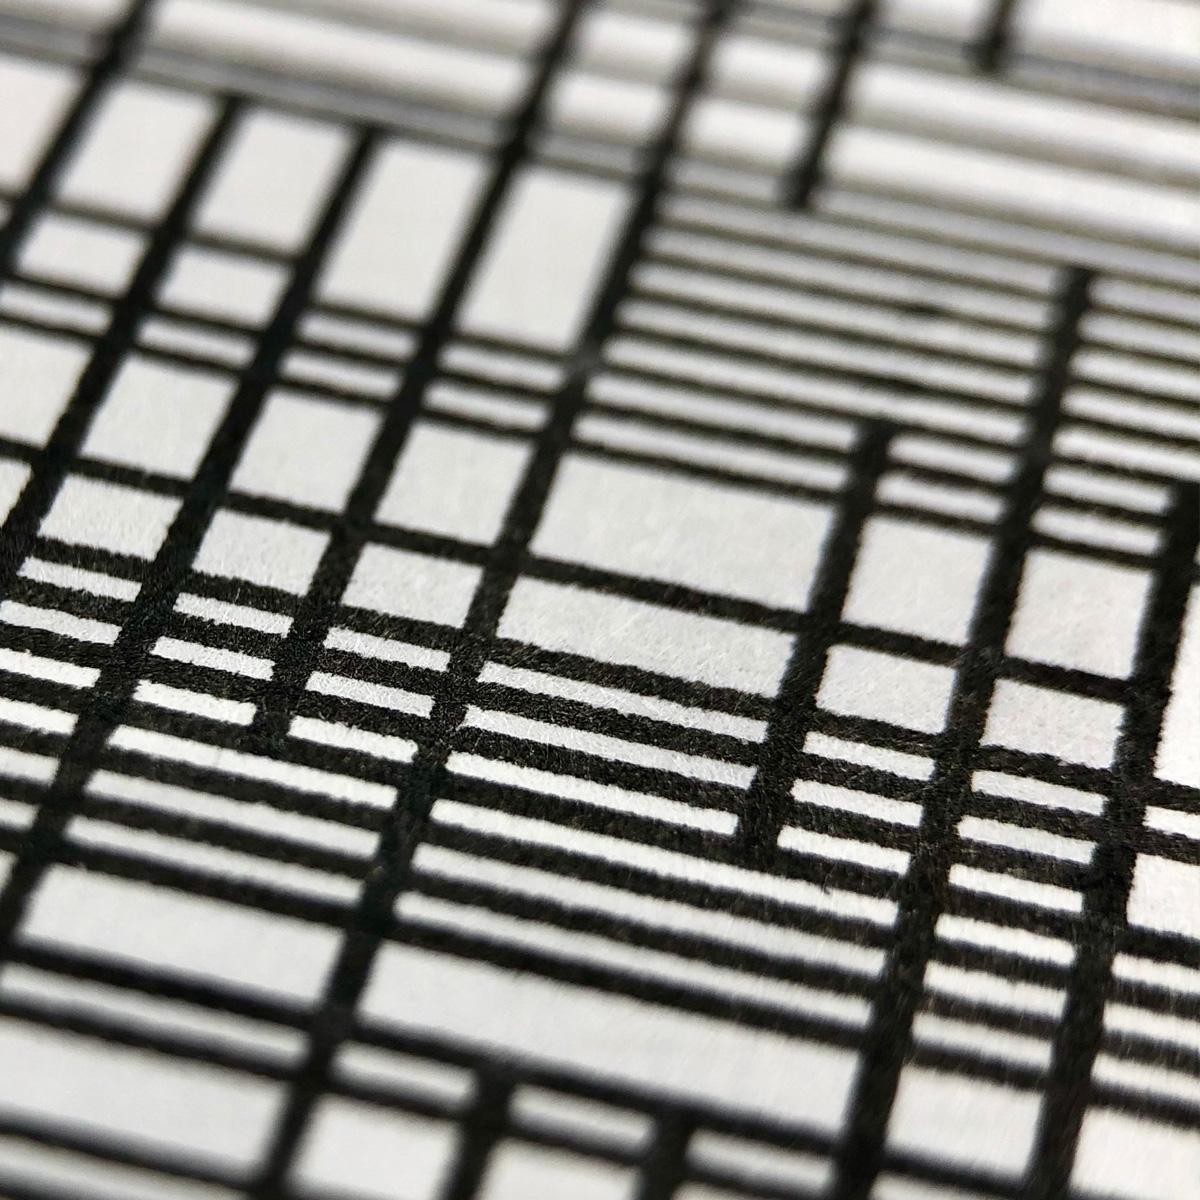 Closeup detail of a few of the grid items, showing how the ink interacts with the paper texture